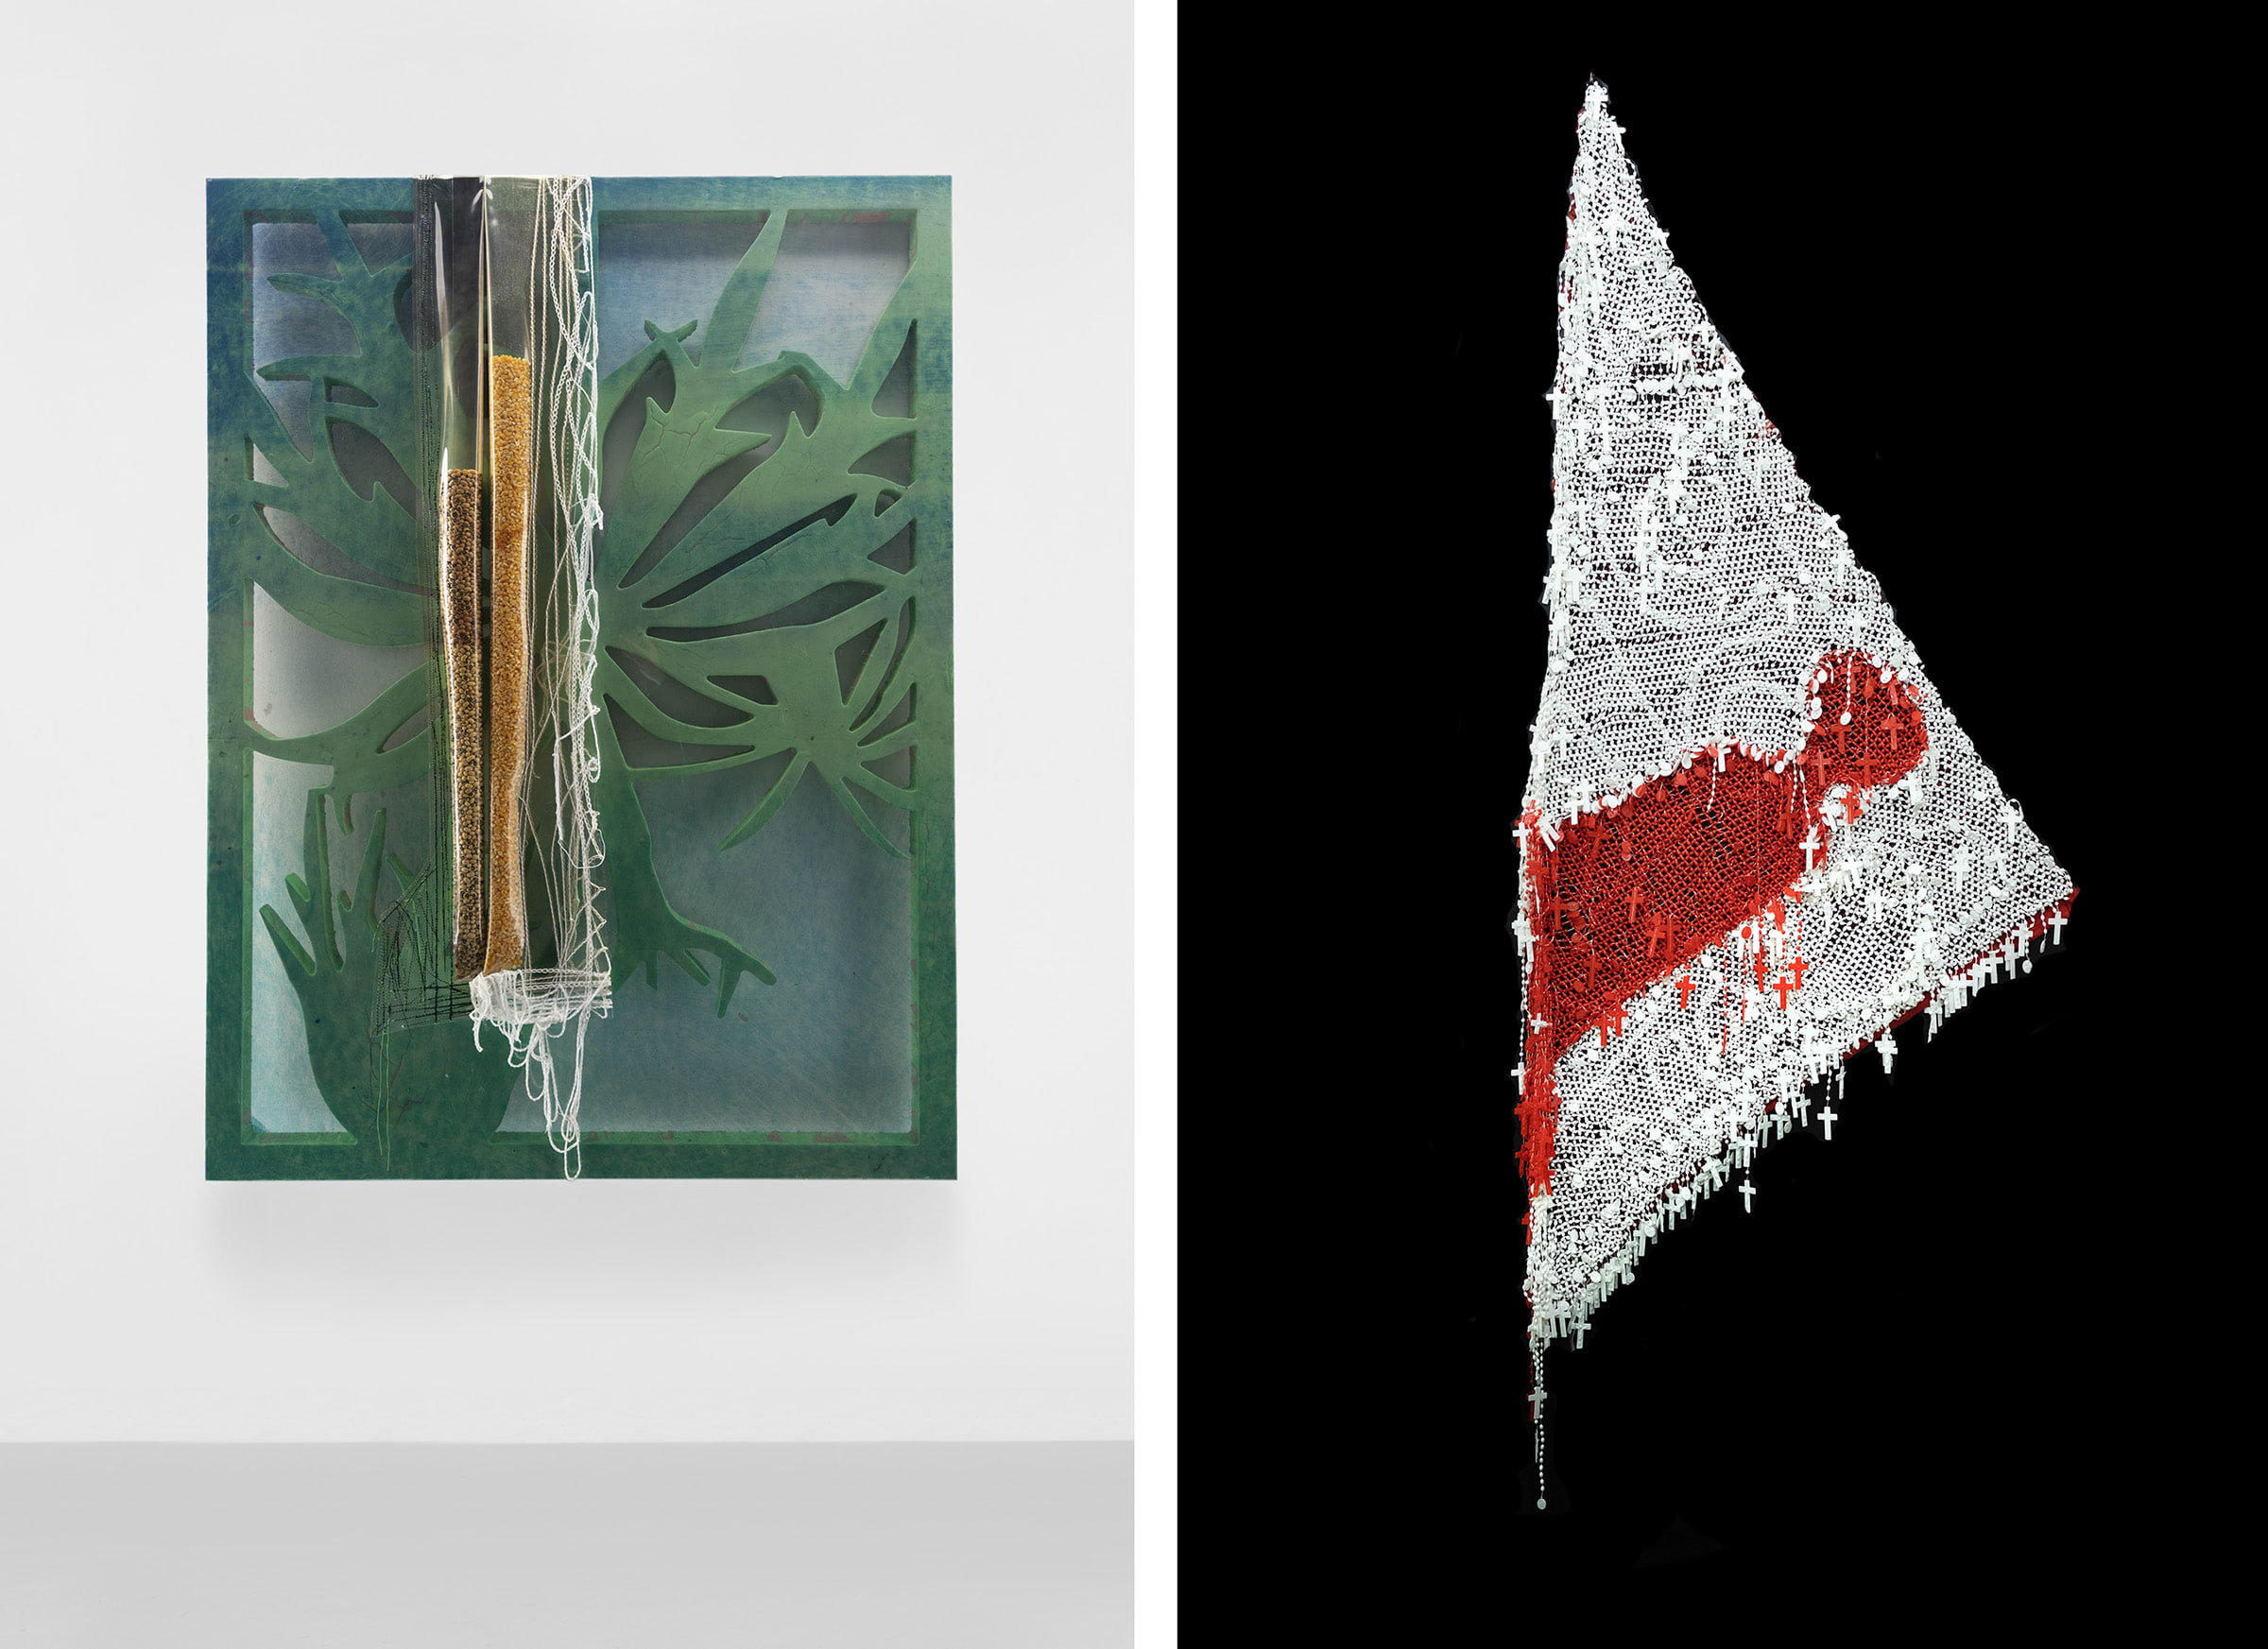 Left: Julien Creuzet, Untitled, 2023. Courtesy of the artist and High Art, Paris and Arles. Right: Victor Ehikhamenor, Always at the Edge of Things II, 2022. Courtesy of the artist and Retro Africa, Abuja, Nigeria.